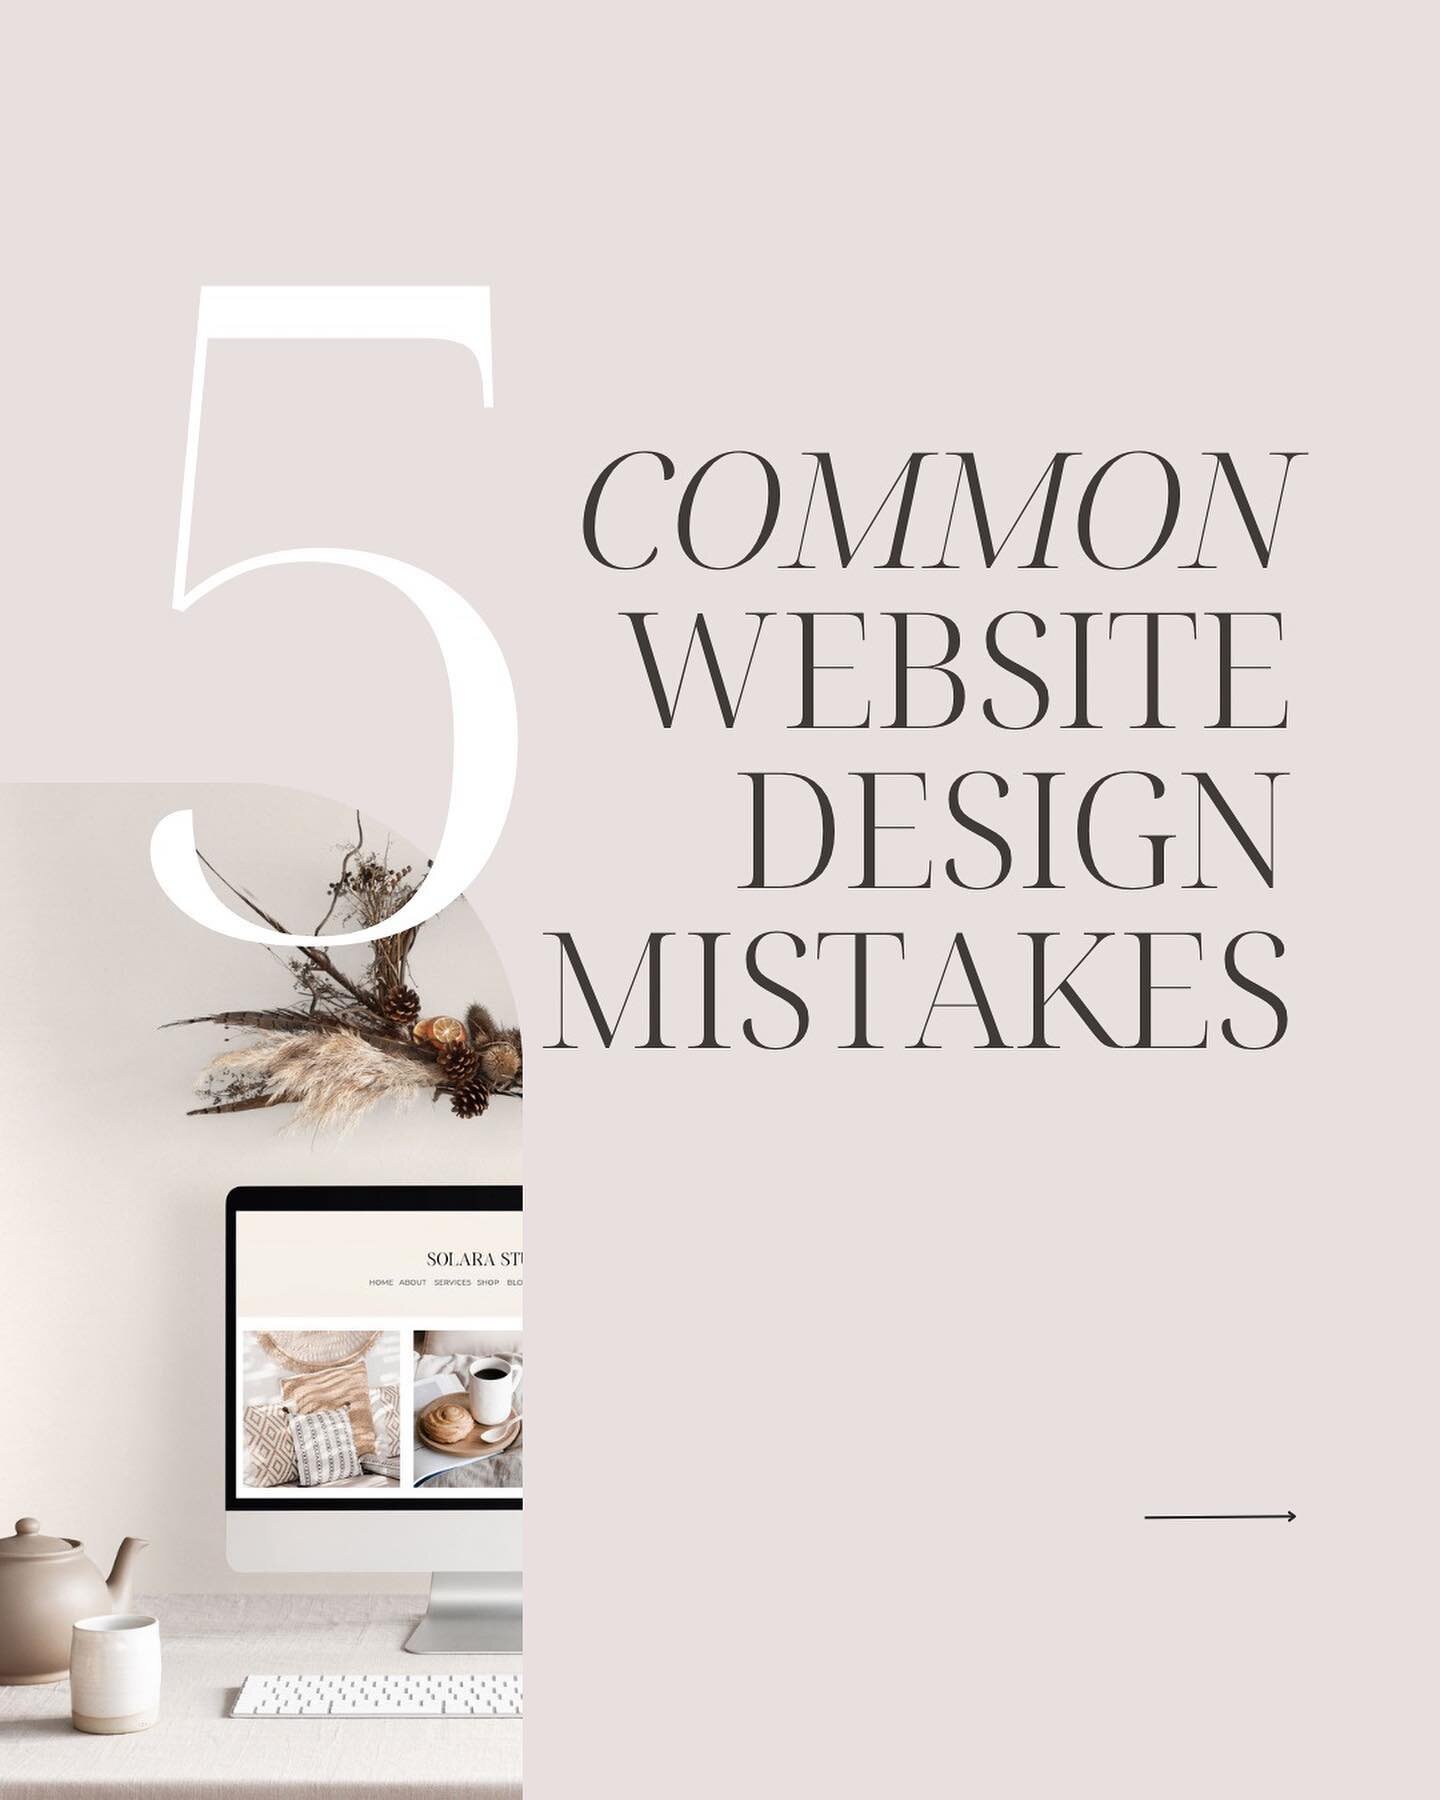 ✨5 Common Website Design Mistakes✨
Let&rsquo;s chat about common website mistakes and how to avoid them. 

Whether you&rsquo;re designing or managing a website, you&rsquo;ll want to keep an eye out for mistakes that could cost you time, energy and mo